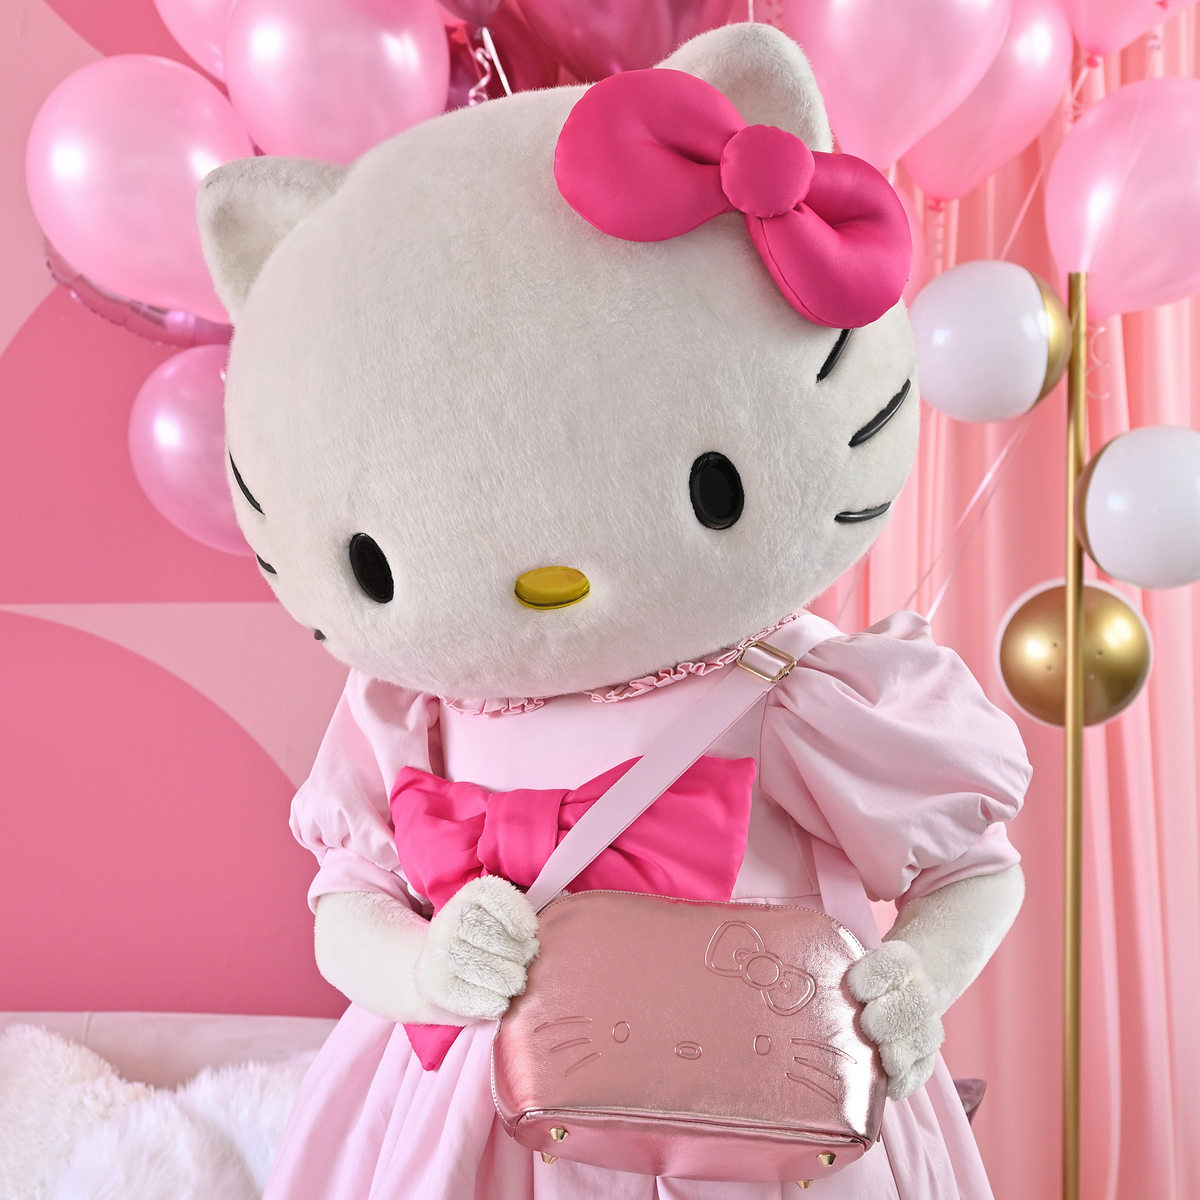 Igloo, Accessories, Hello Kitty Luxe Crossbody Cooler Bag